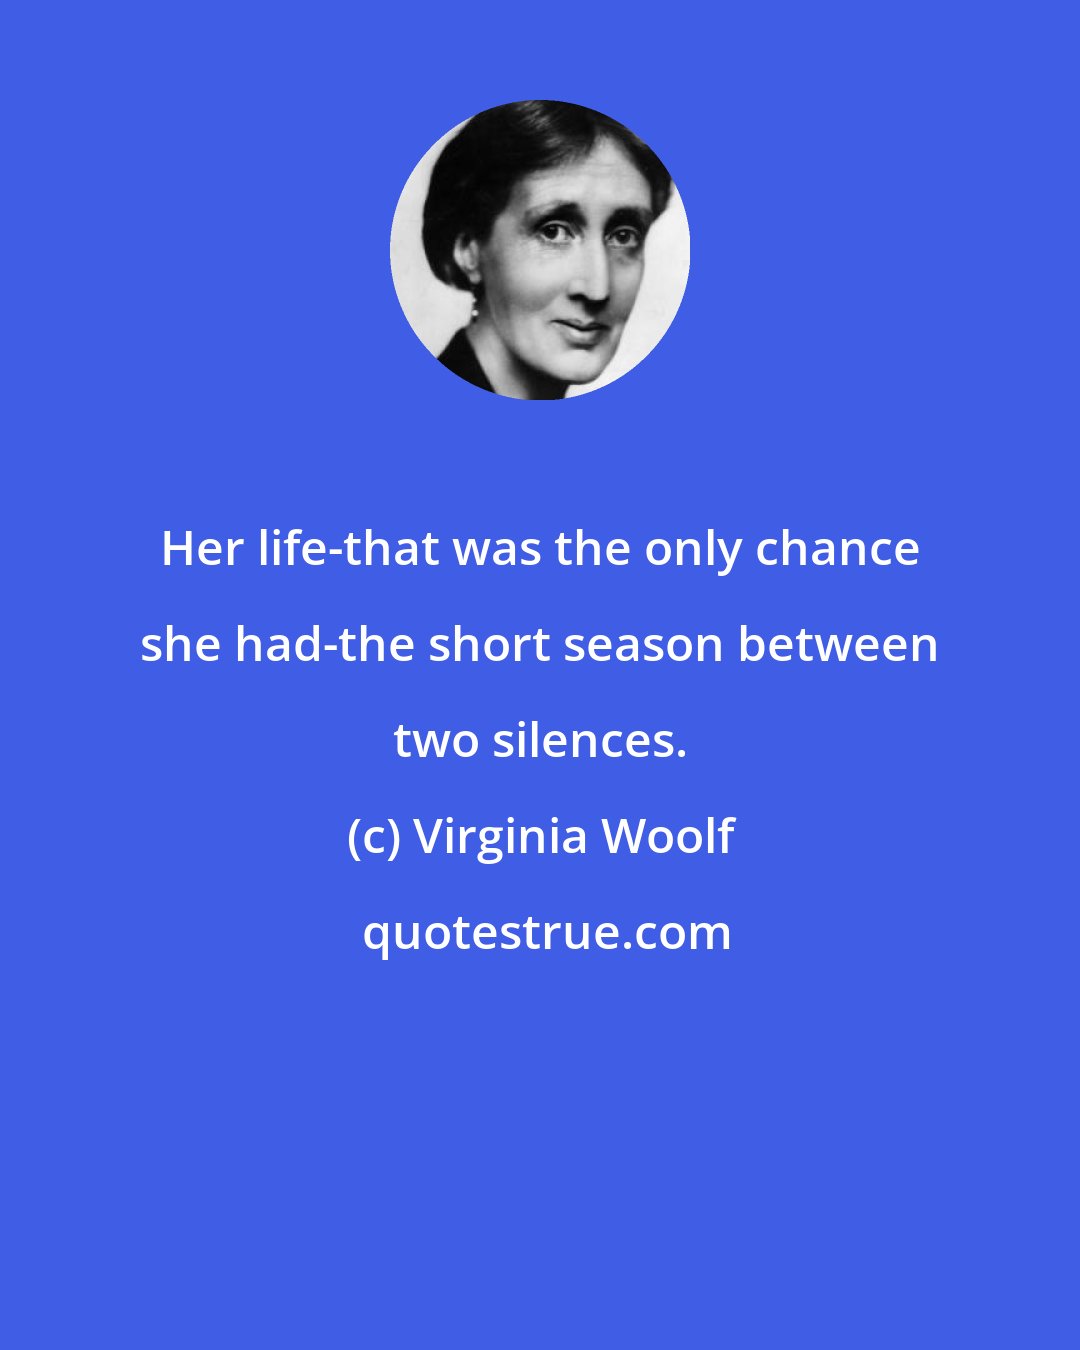 Virginia Woolf: Her life-that was the only chance she had-the short season between two silences.